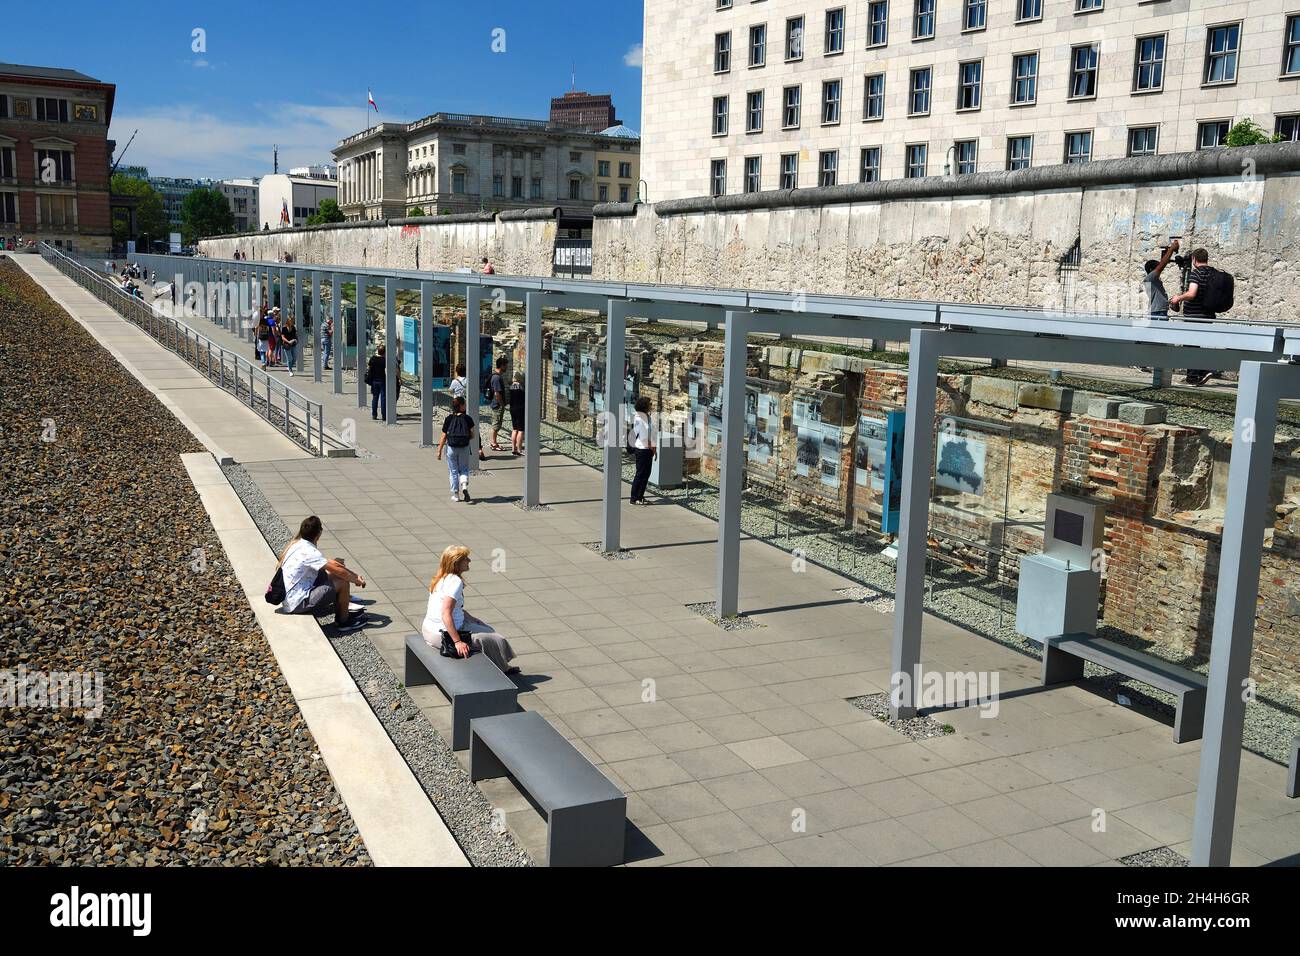 Former site of the Gestapo, the SS and the Reich Security Main Office, exhibition Topography of Terror, remains of the Wall at the back and Detlev Stock Photo